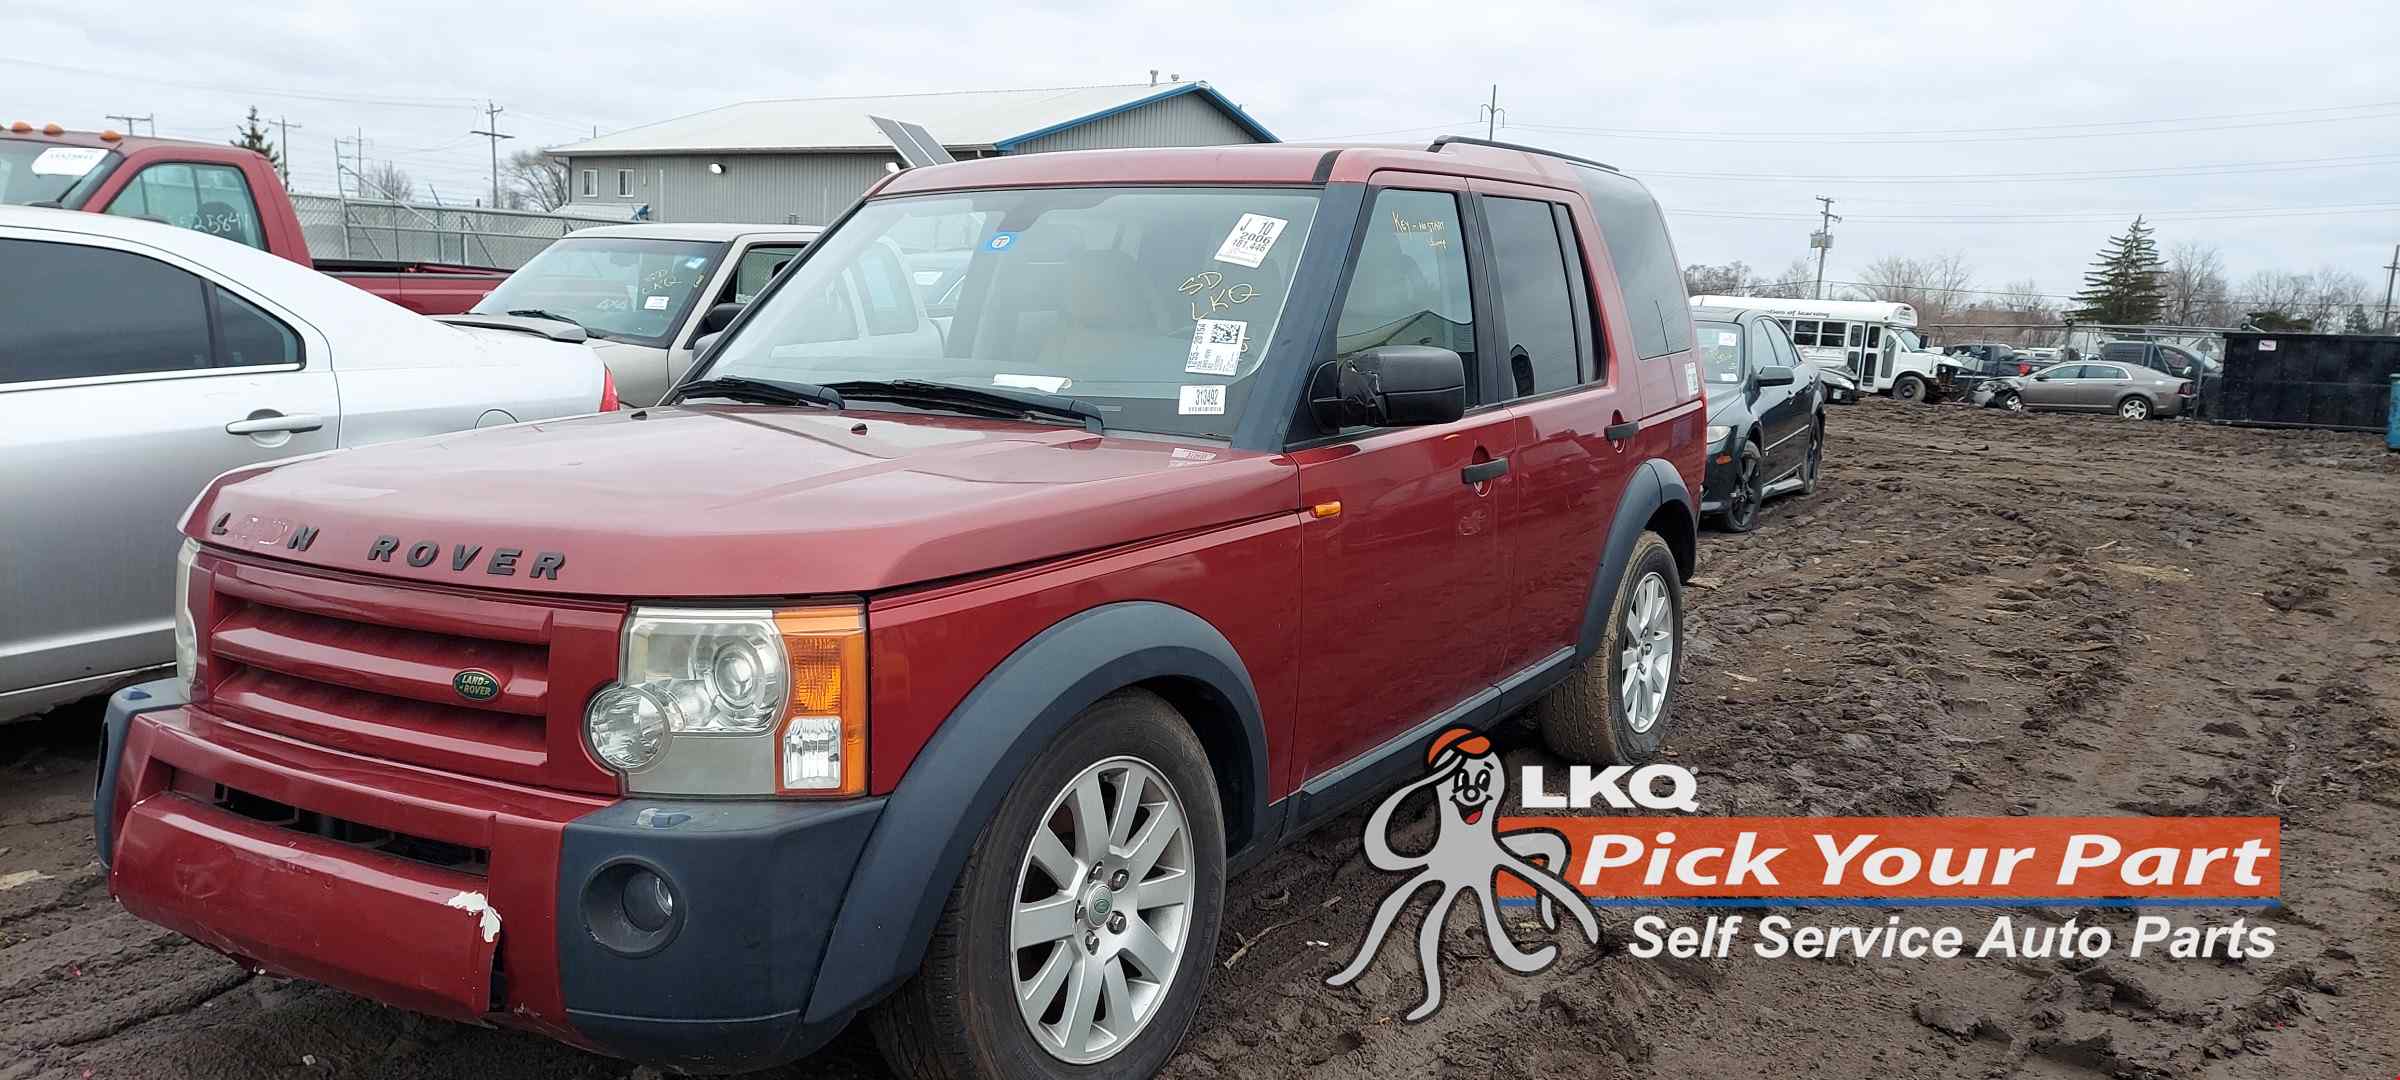 2006 Land Rover Lr3 Used Auto Parts | South Bend